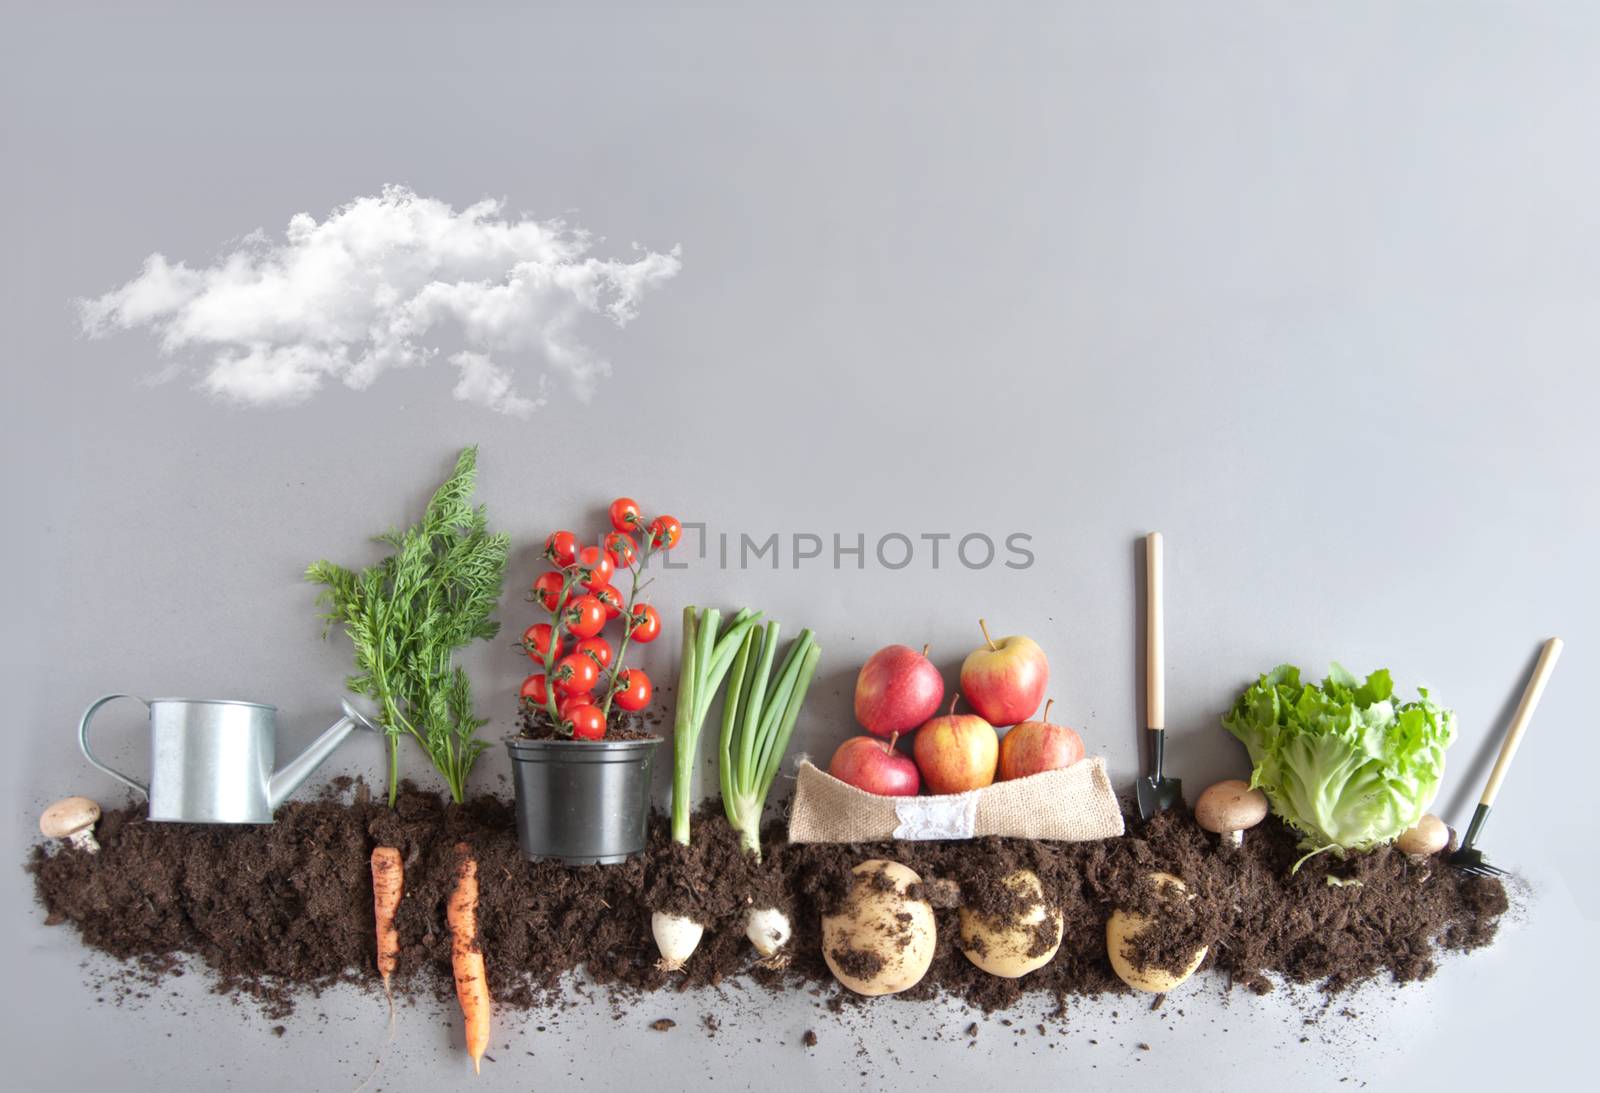 Fruits and vegetables growing in compost including carrots, mushrooms, potatoes and lettuce